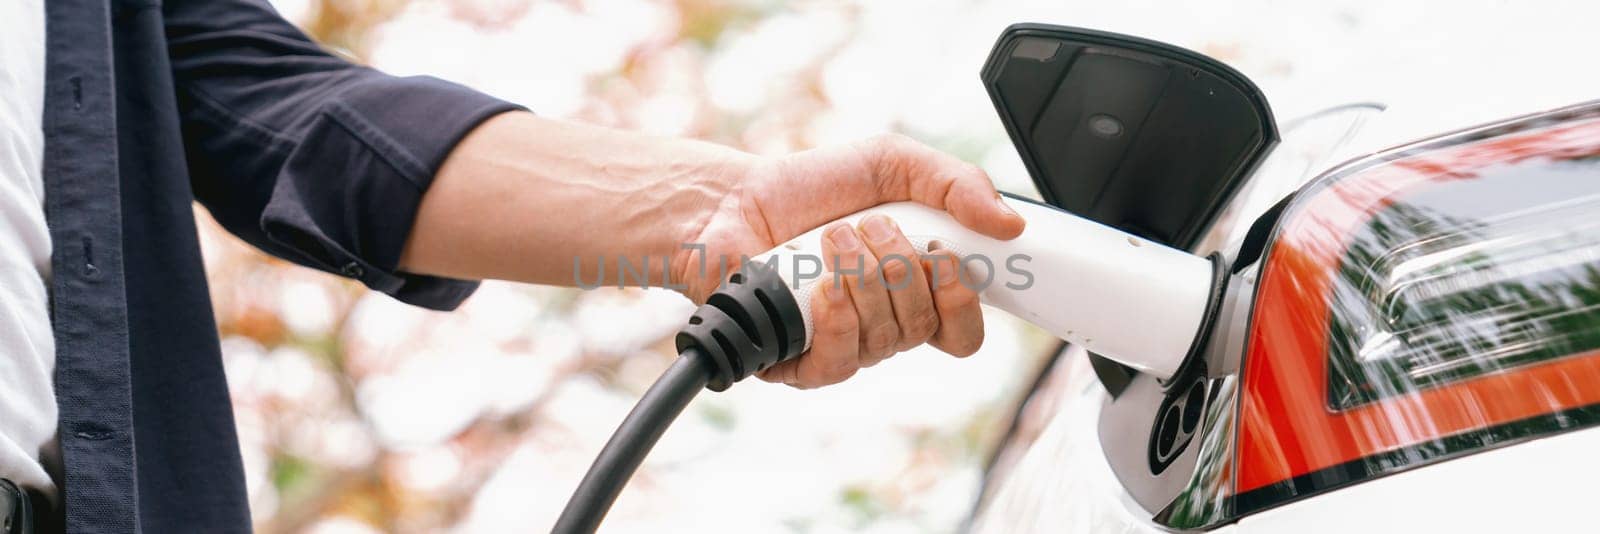 Panorama banner man recharging battery for electric car during autumnal road trip travel EV car in autumnal forest. Eco friendly travel on vacation during autumn with electric vehicle. Exalt